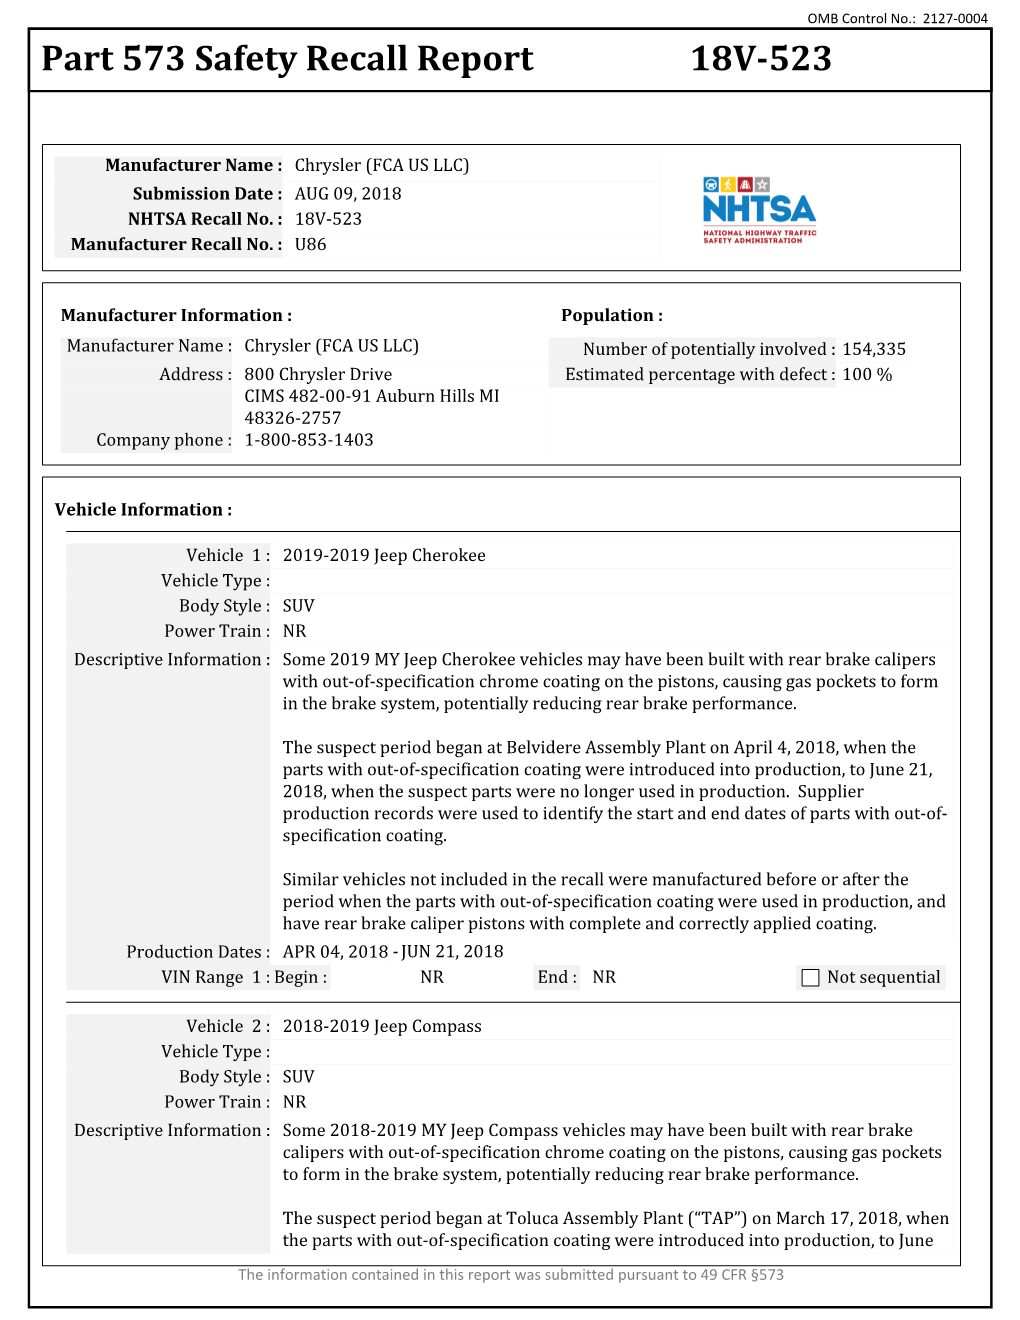 Part 573 Safety Recall Report 18V-523